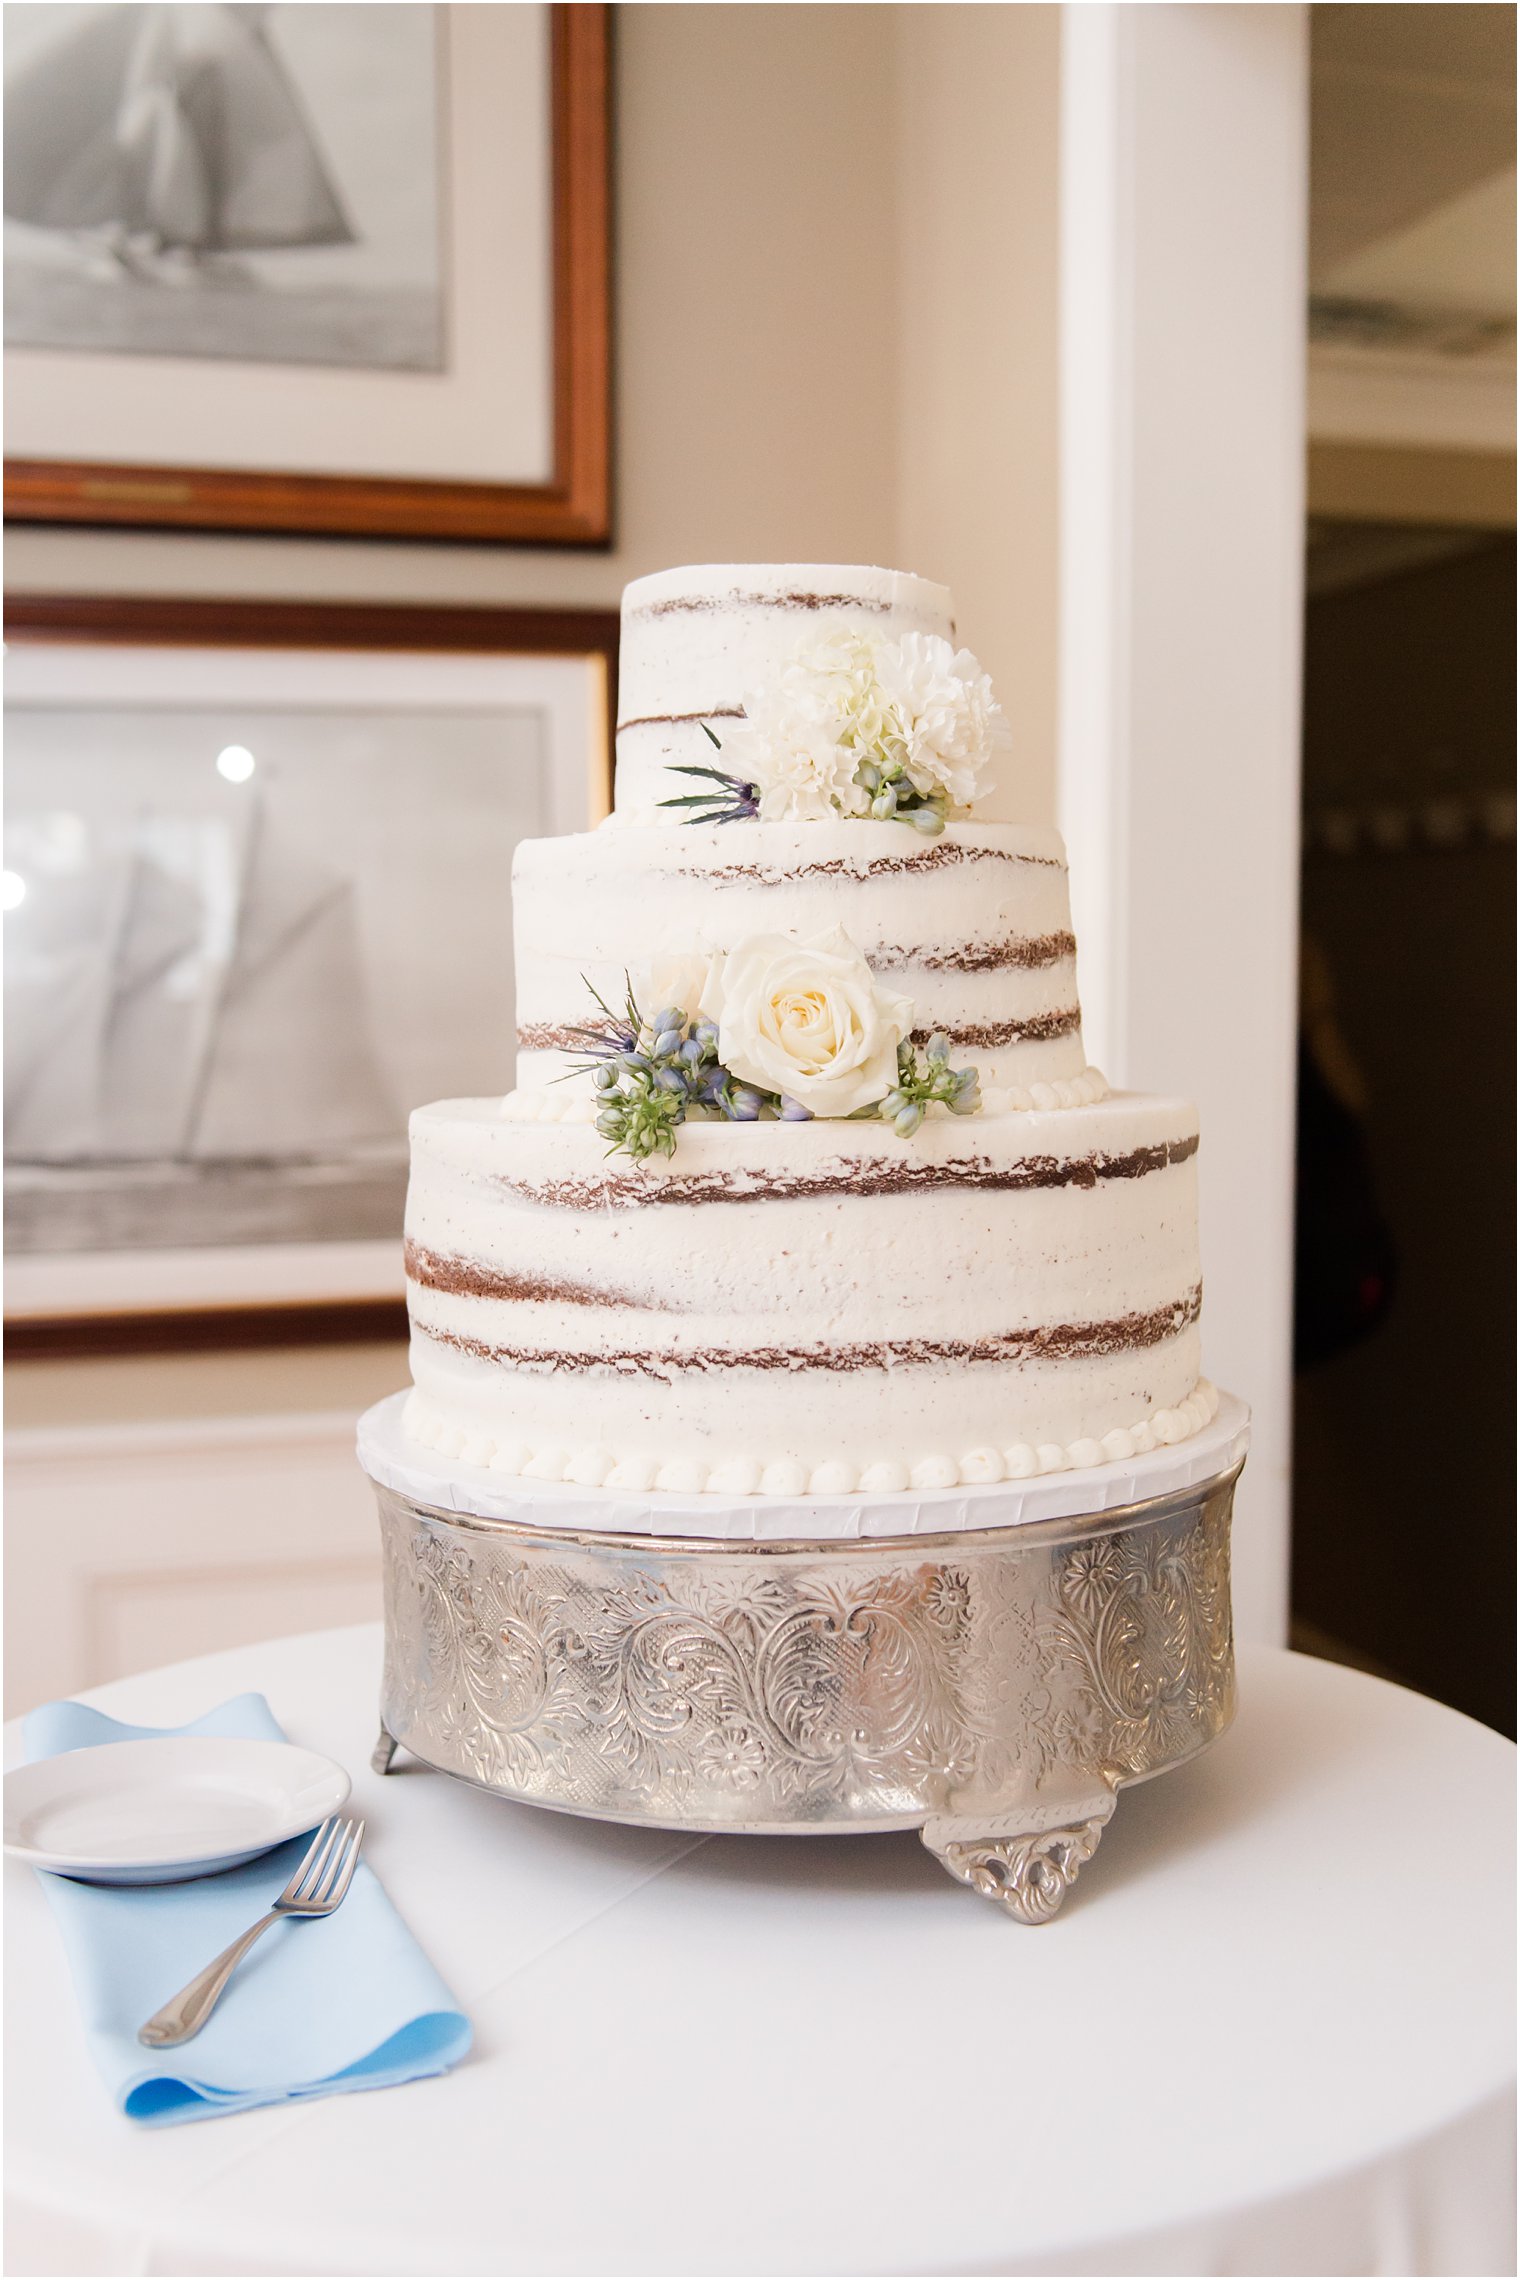 tiered naked wedding cake with floral accents at Brant Beach Yacht Club